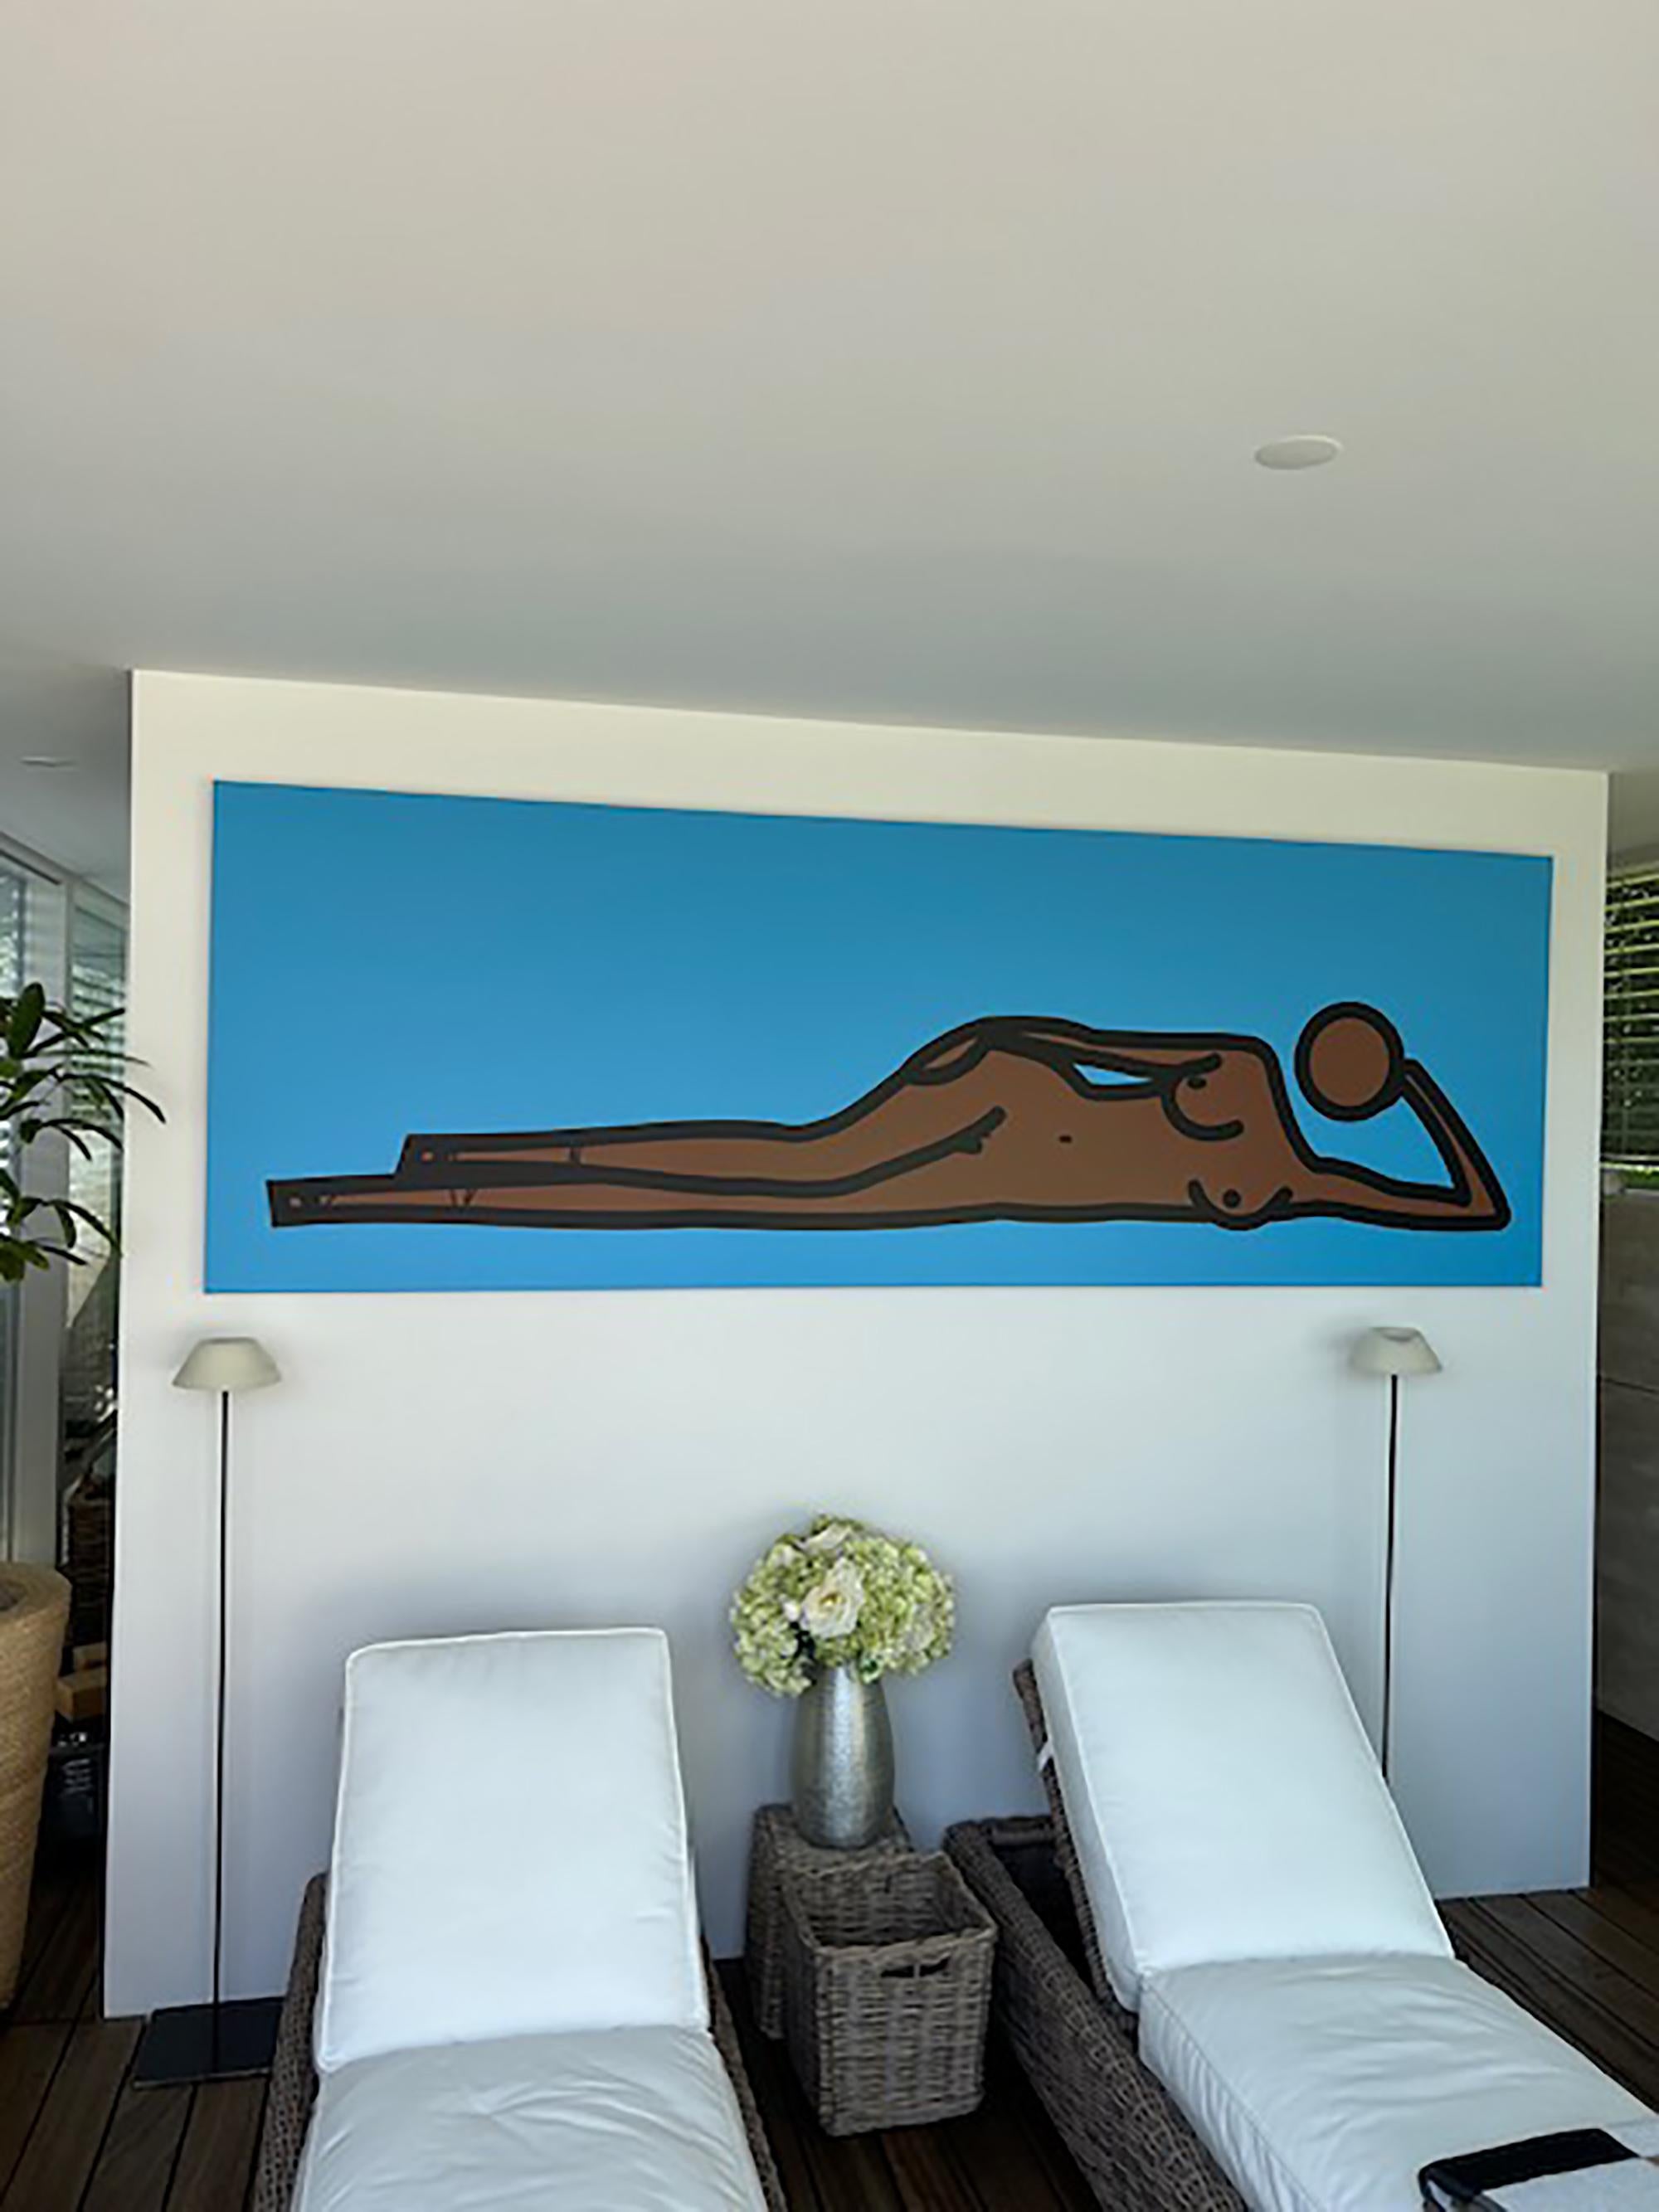 Julian Opie
Bijou reclining. 4, 2010
Vinyl on wooden stretcher
95.3 x 280.8 cm (37 1/2 x 110 1/2 in.) 
Unique

Julian Opie’s simple, graphic figurative portraits and landscapes generate a pared-back perspective on contemporary life. The artist’s